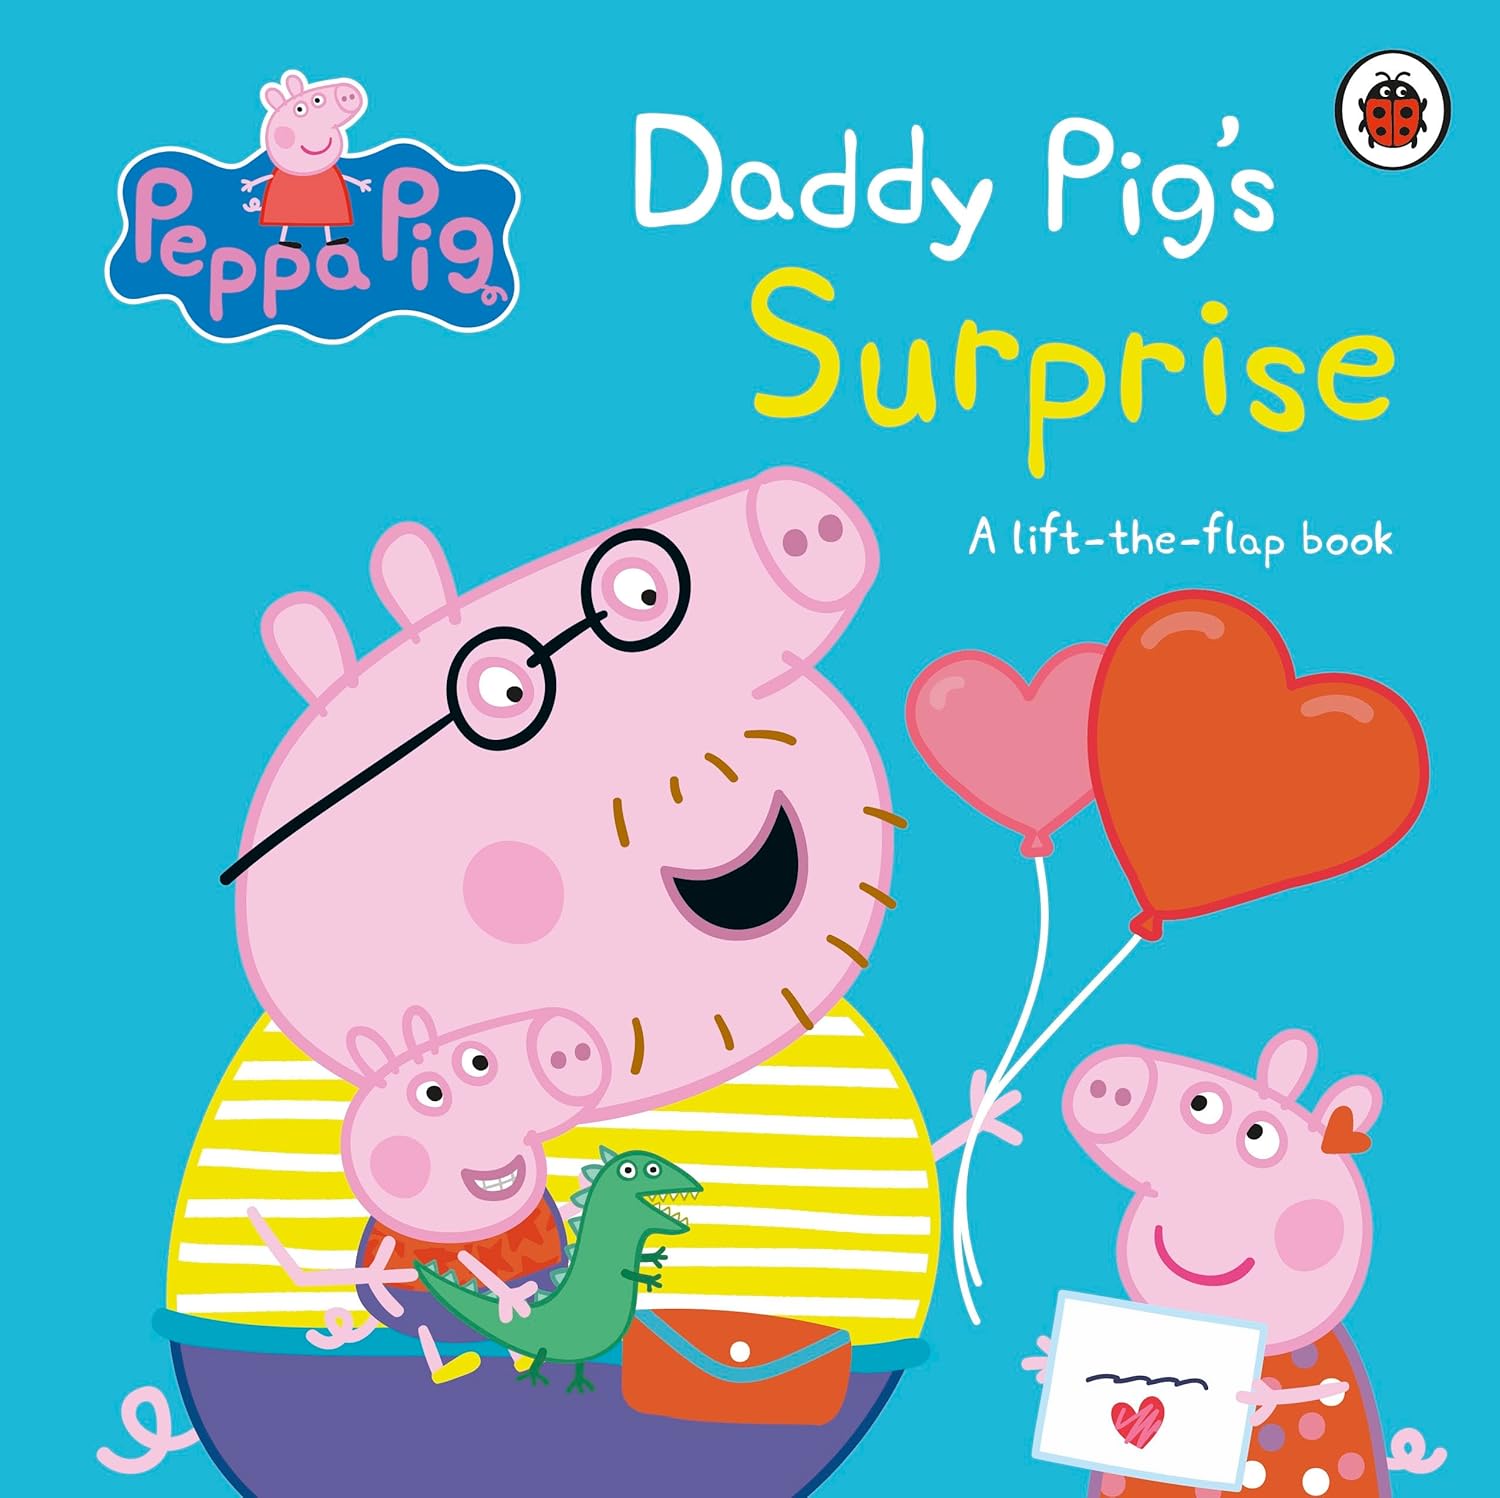 Peppa Pig: Daddy Pig's Surprise